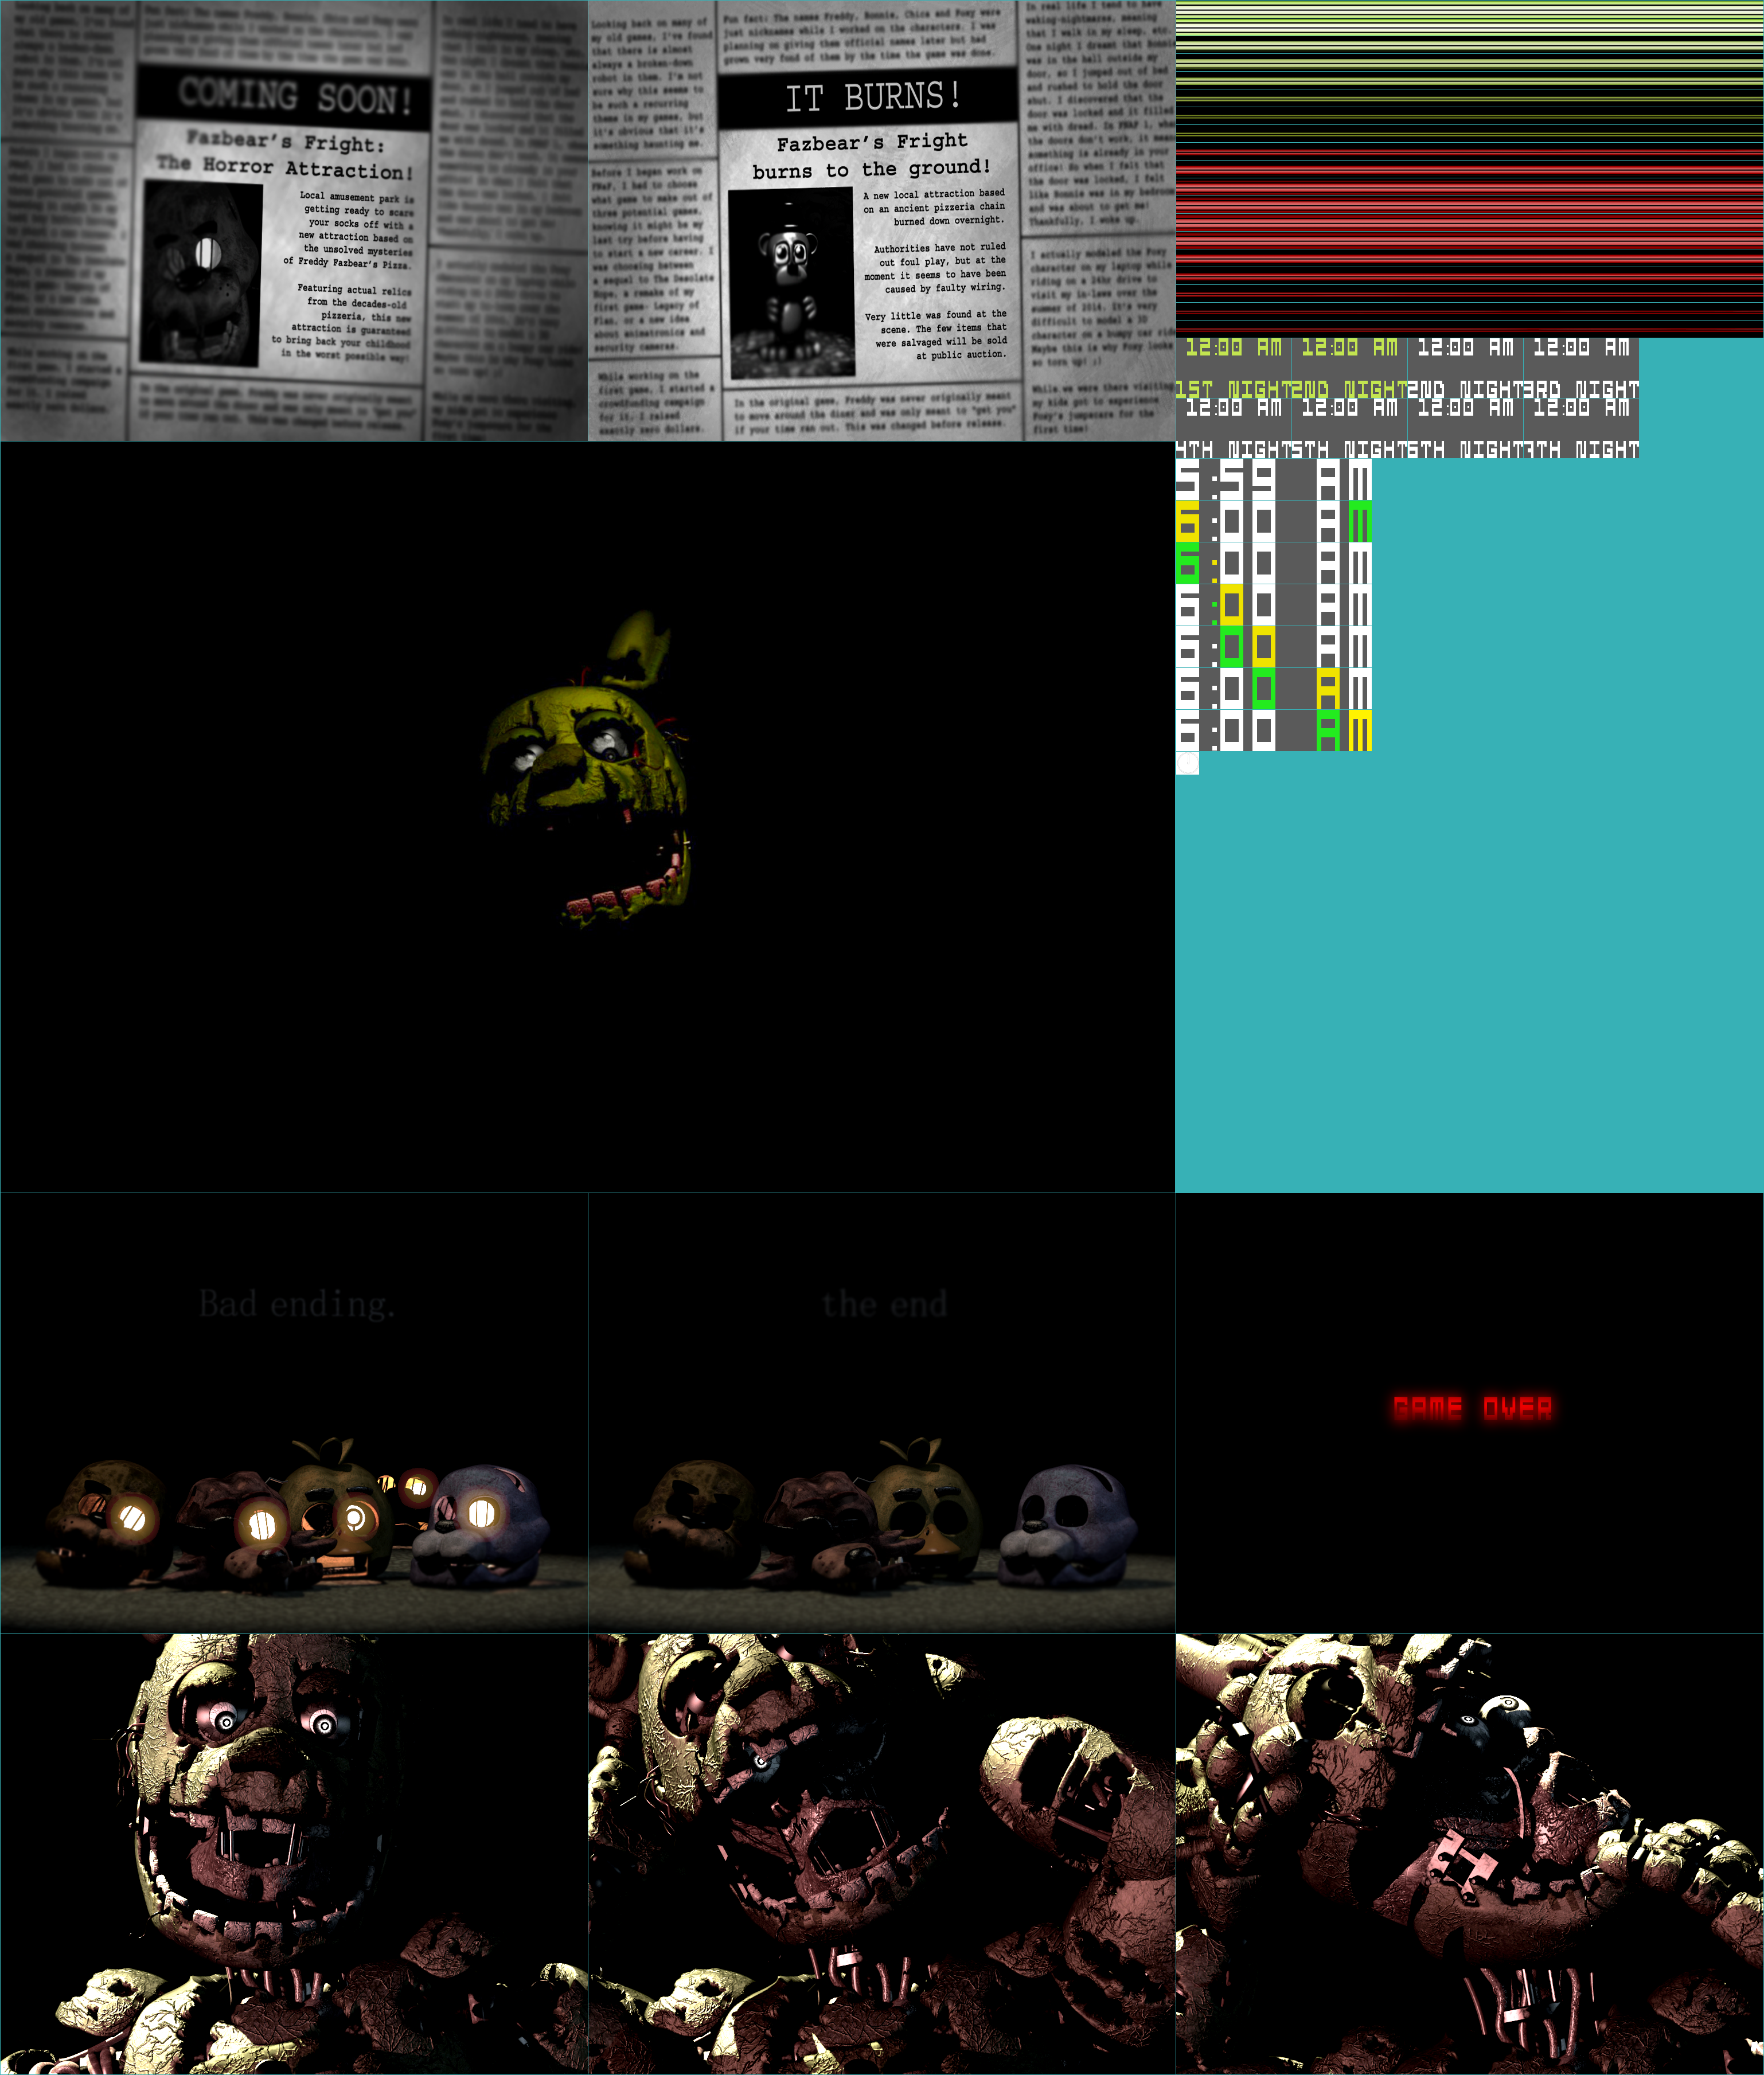 PC / Computer - Five Nights at Freddy's - Doors - The Spriters Resource